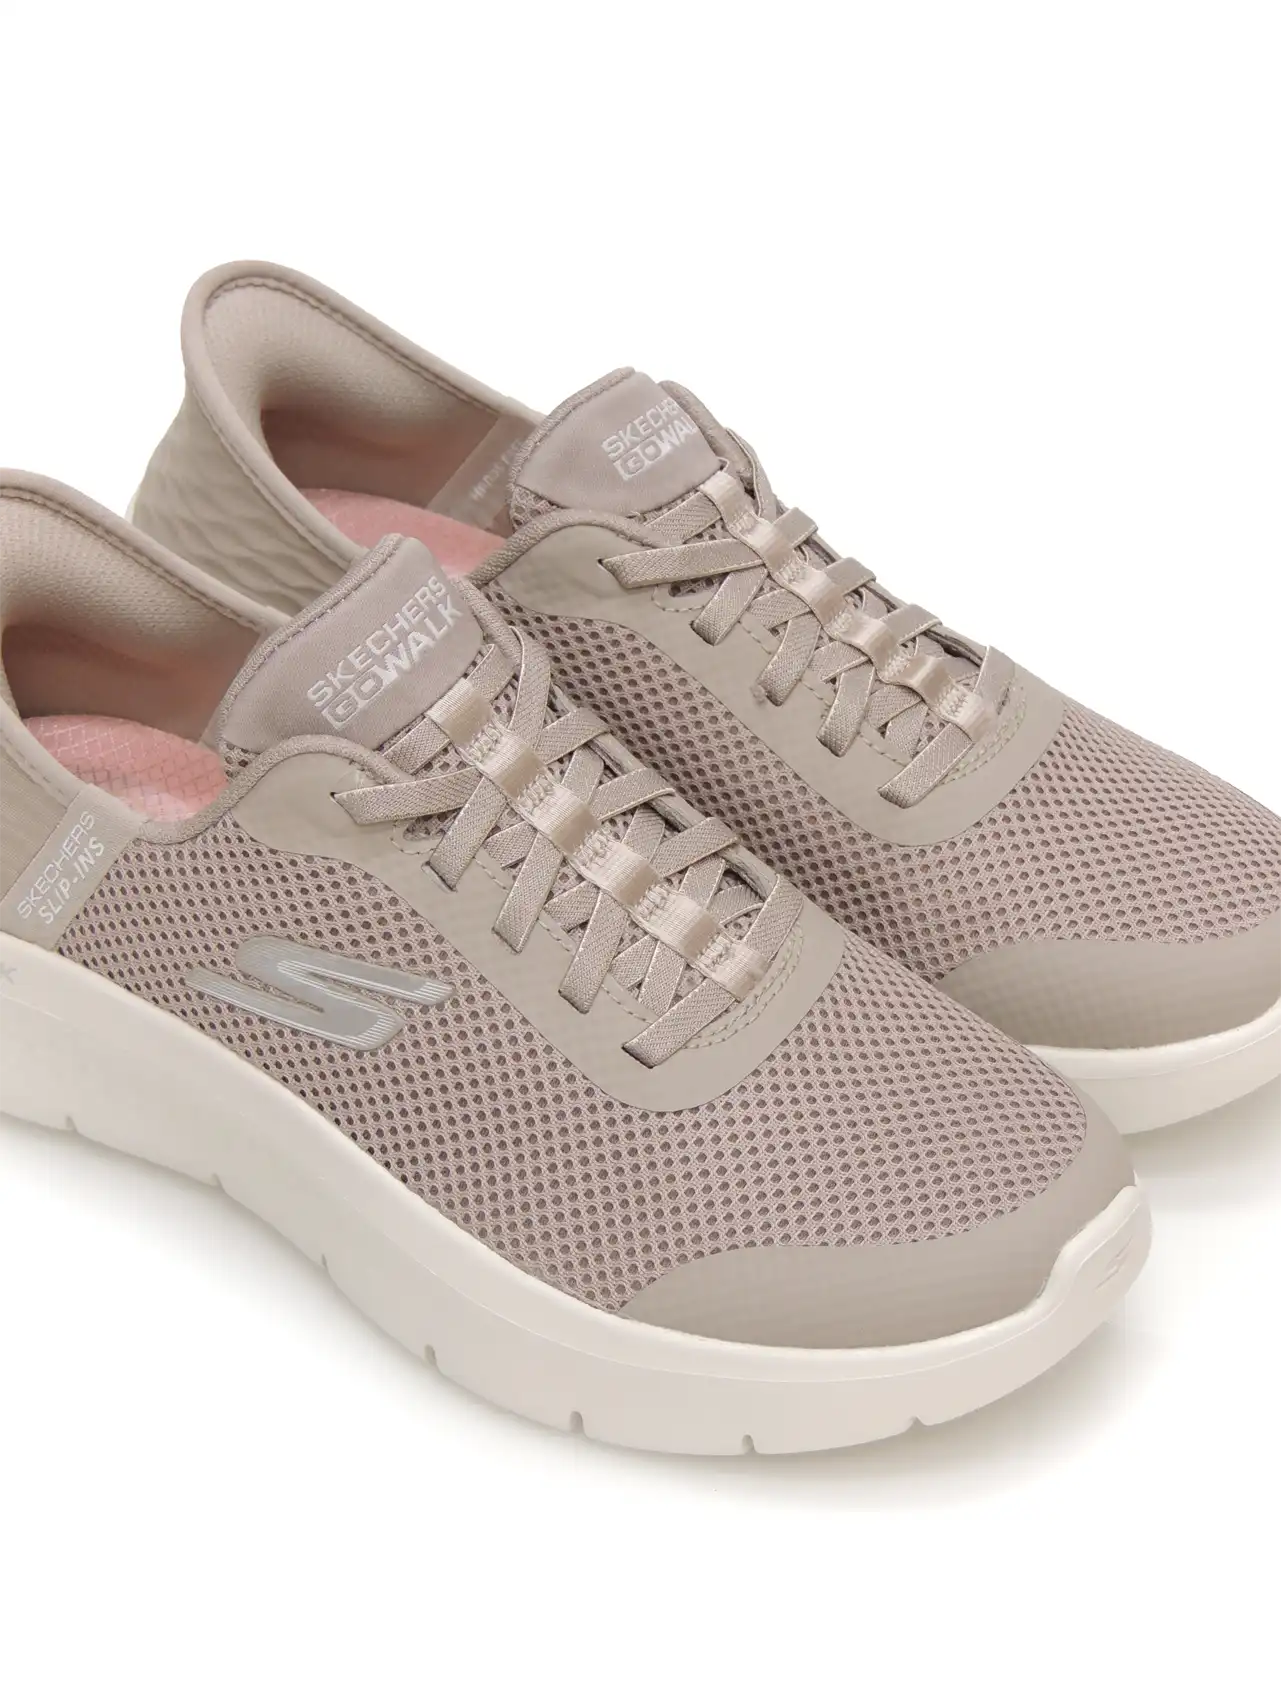 sneakers--skechers-124836-textil-taupe